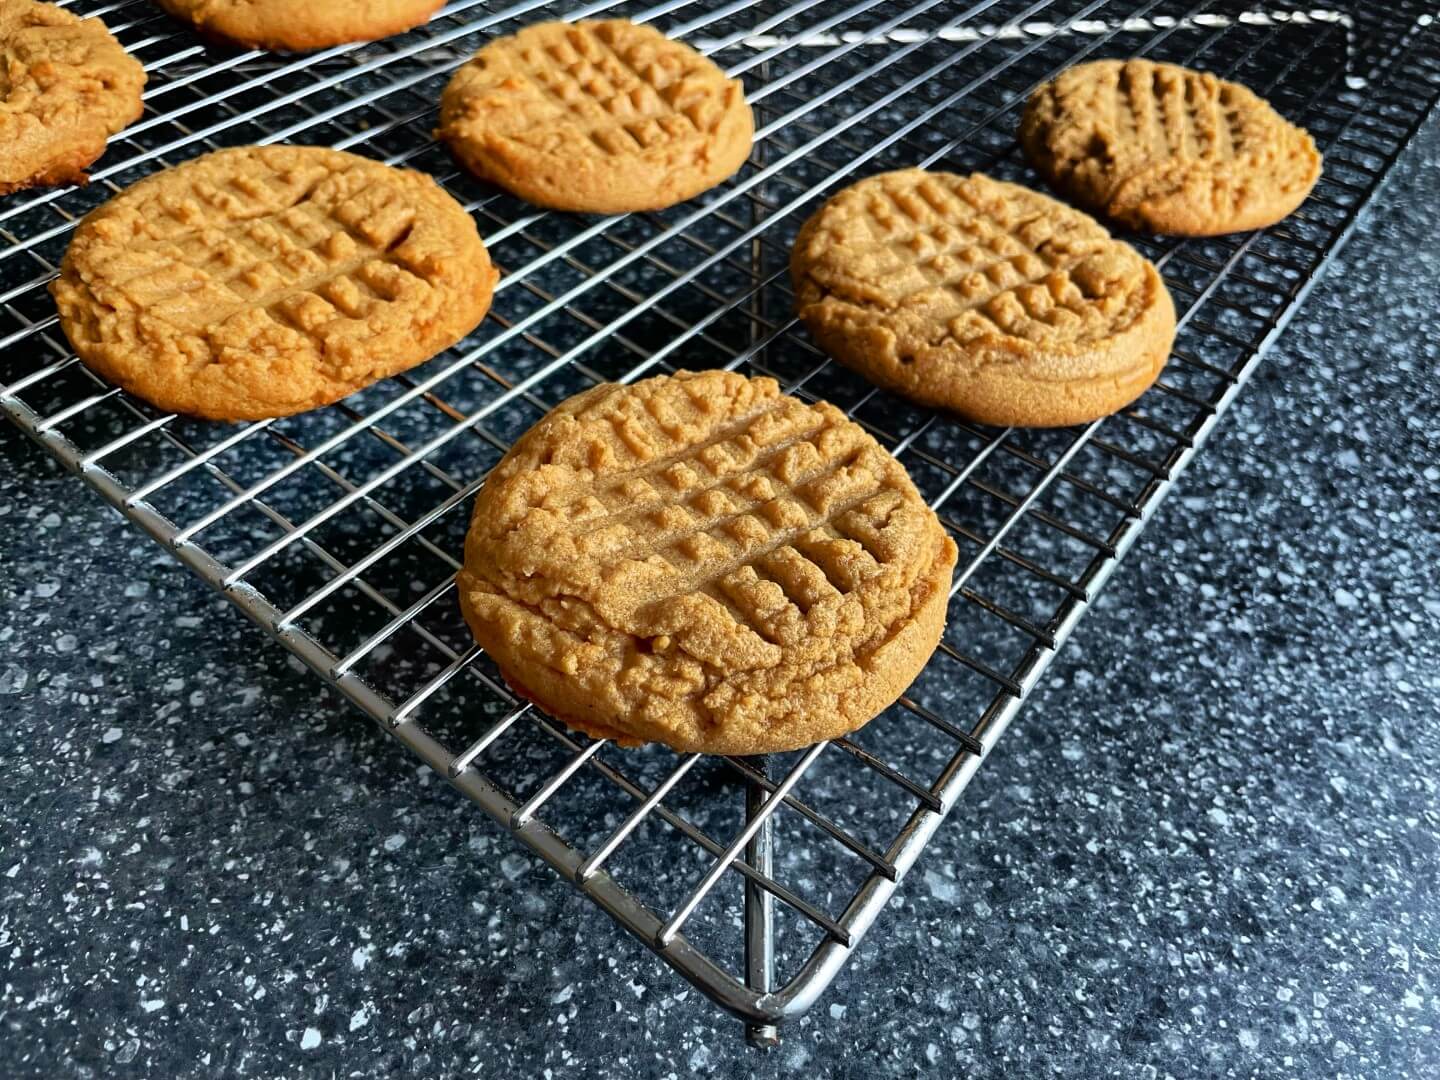 Baked Peanut Butter Cookies on a wire rack.